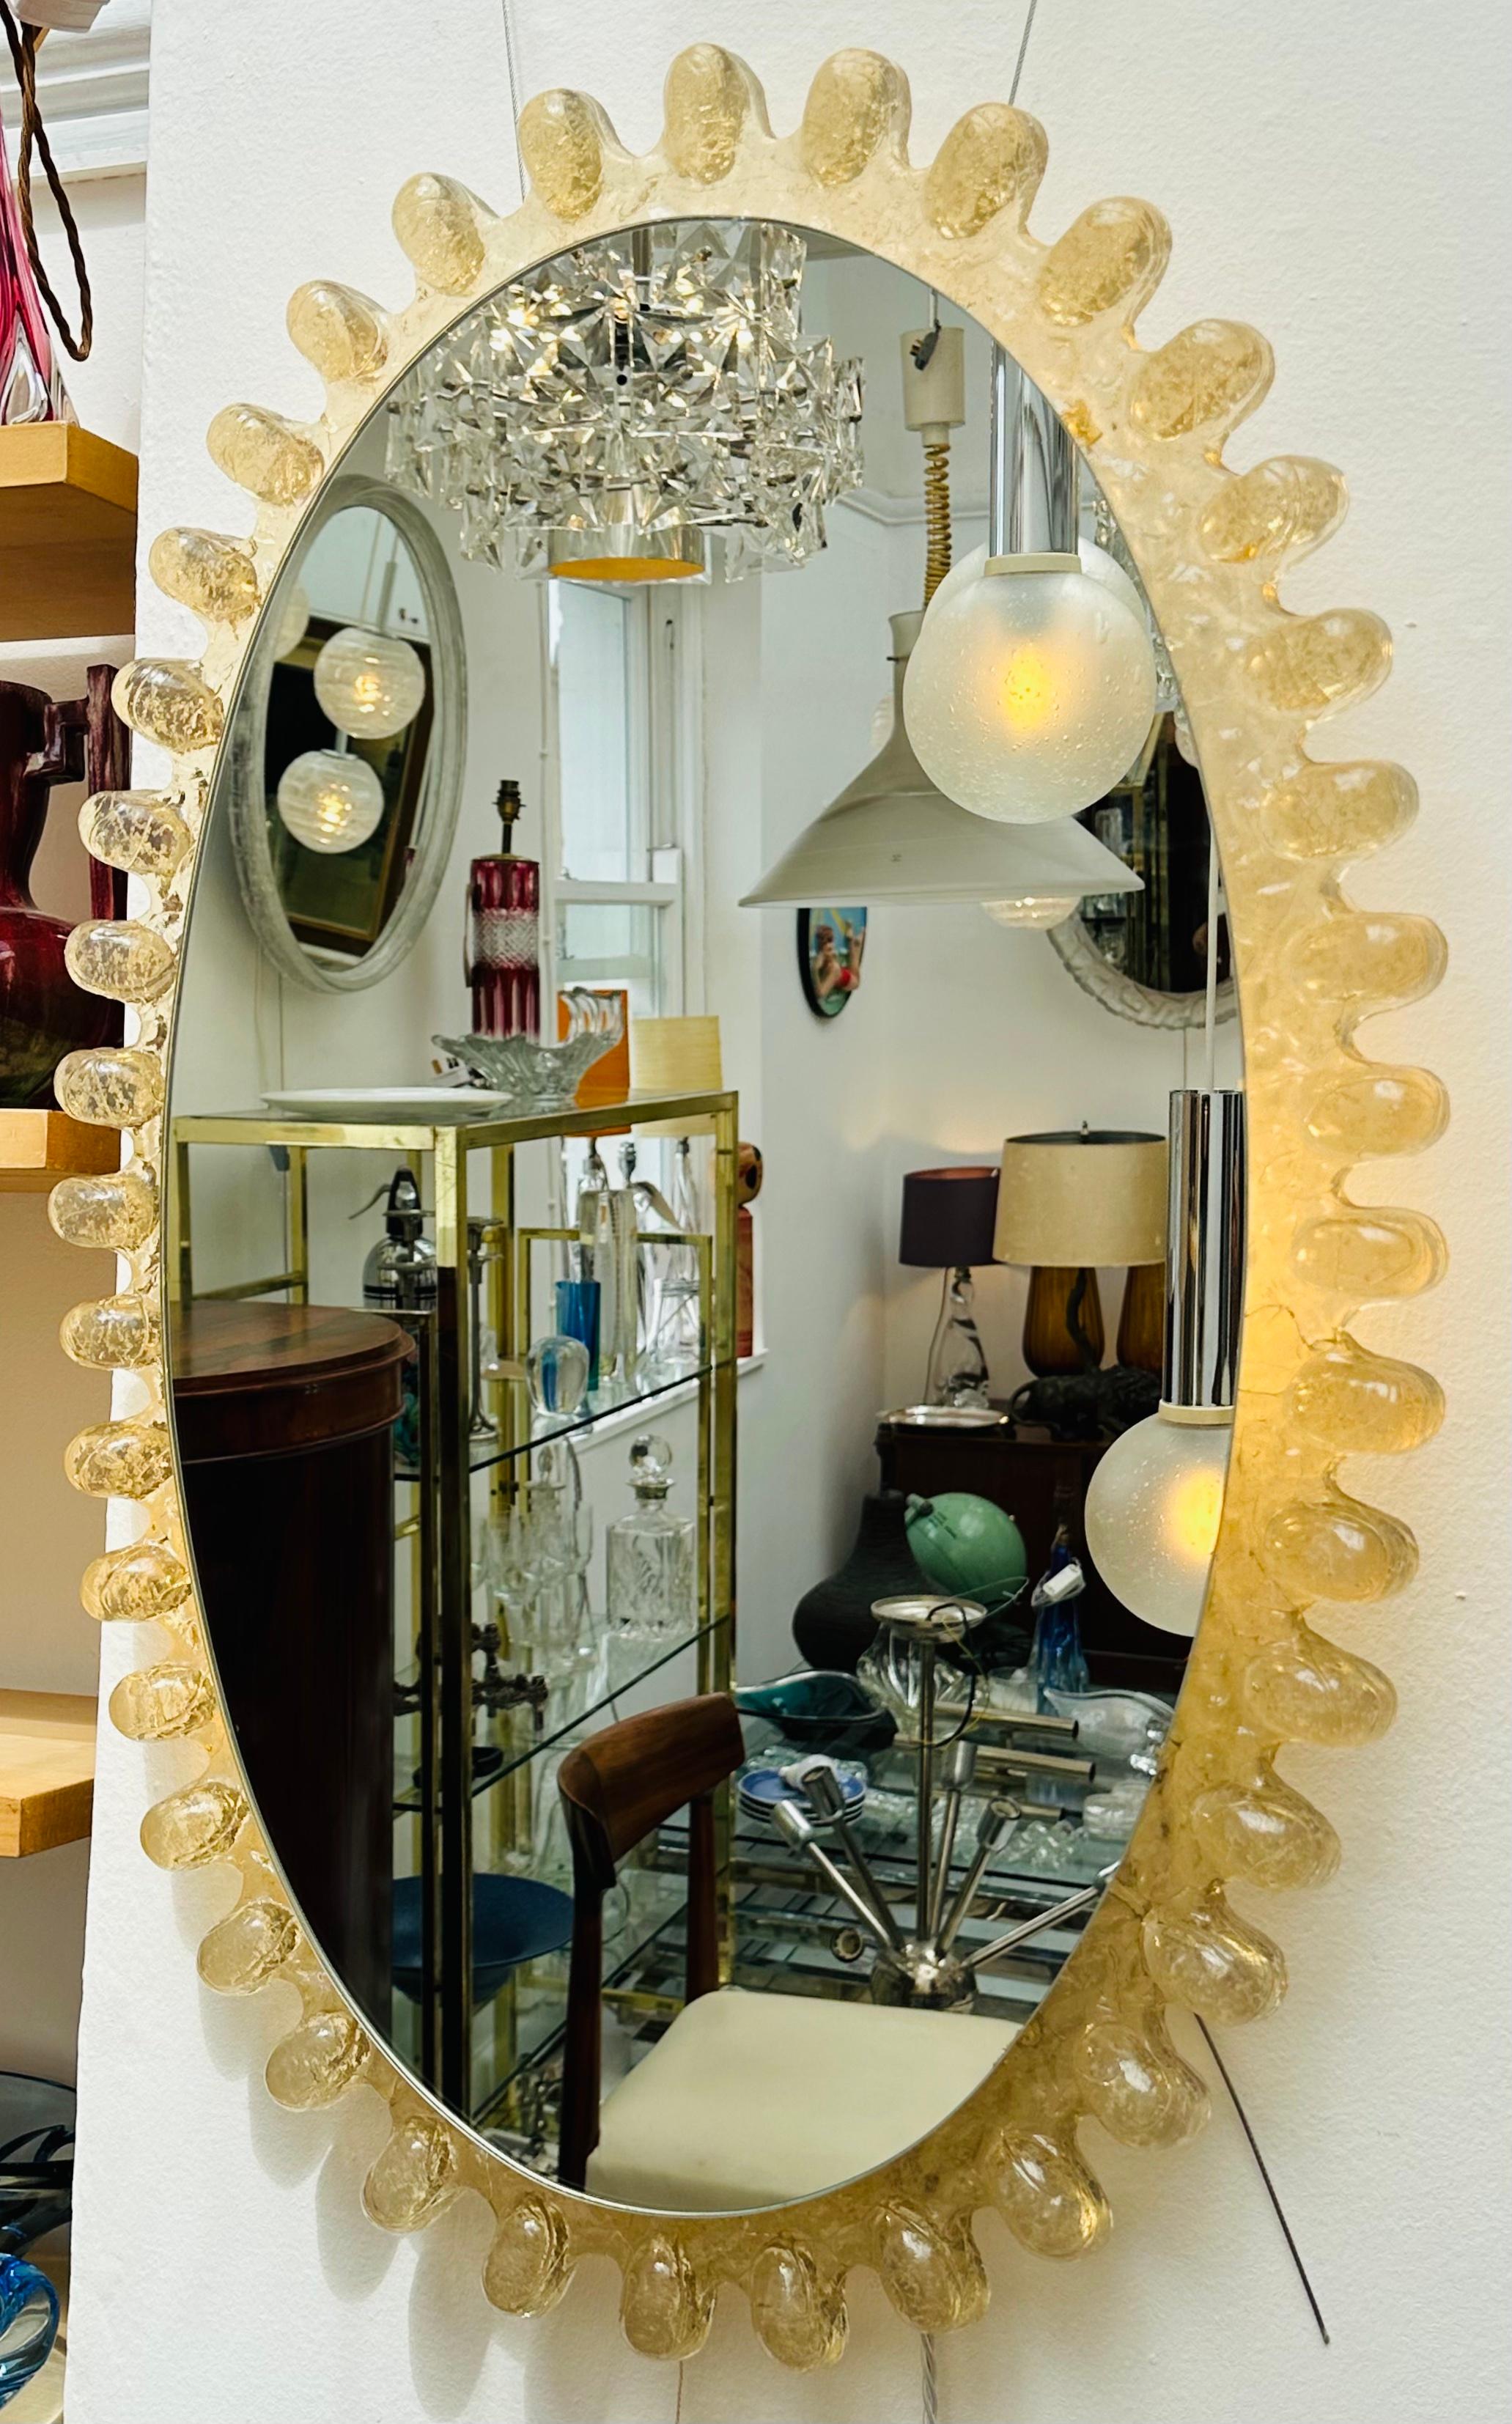 An unusual and rare to source with this design a 1970s German Hillebrand Leuchten illuminated wall mirror with a raindrop effect amber transparent lucite frame surrounding it. The mirror hangs from a white lacquered frame where the lightbulbs are